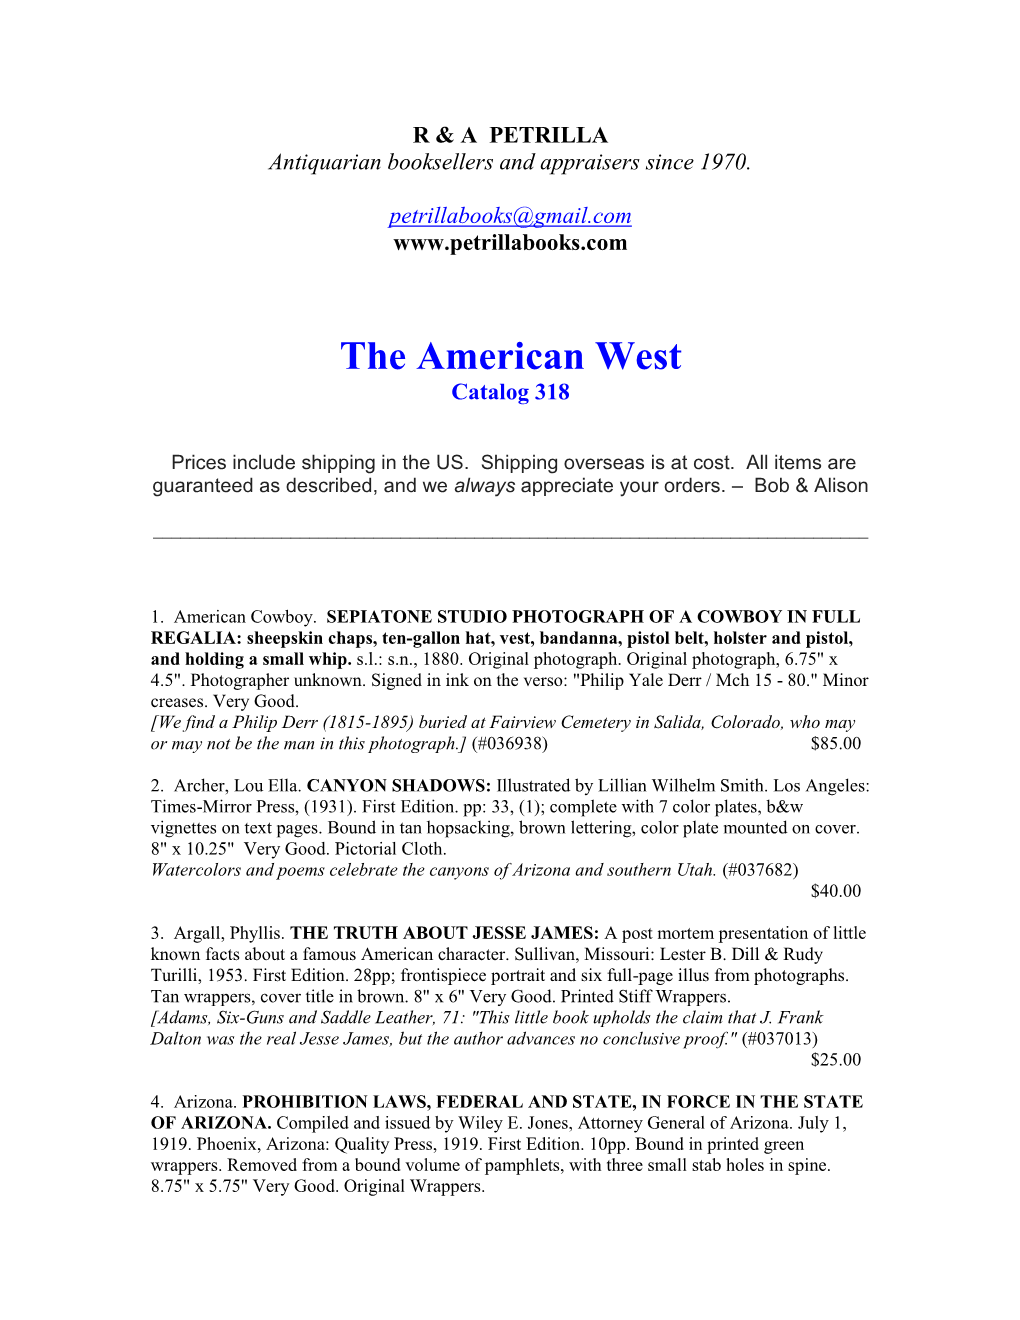 The American West Catalog 318